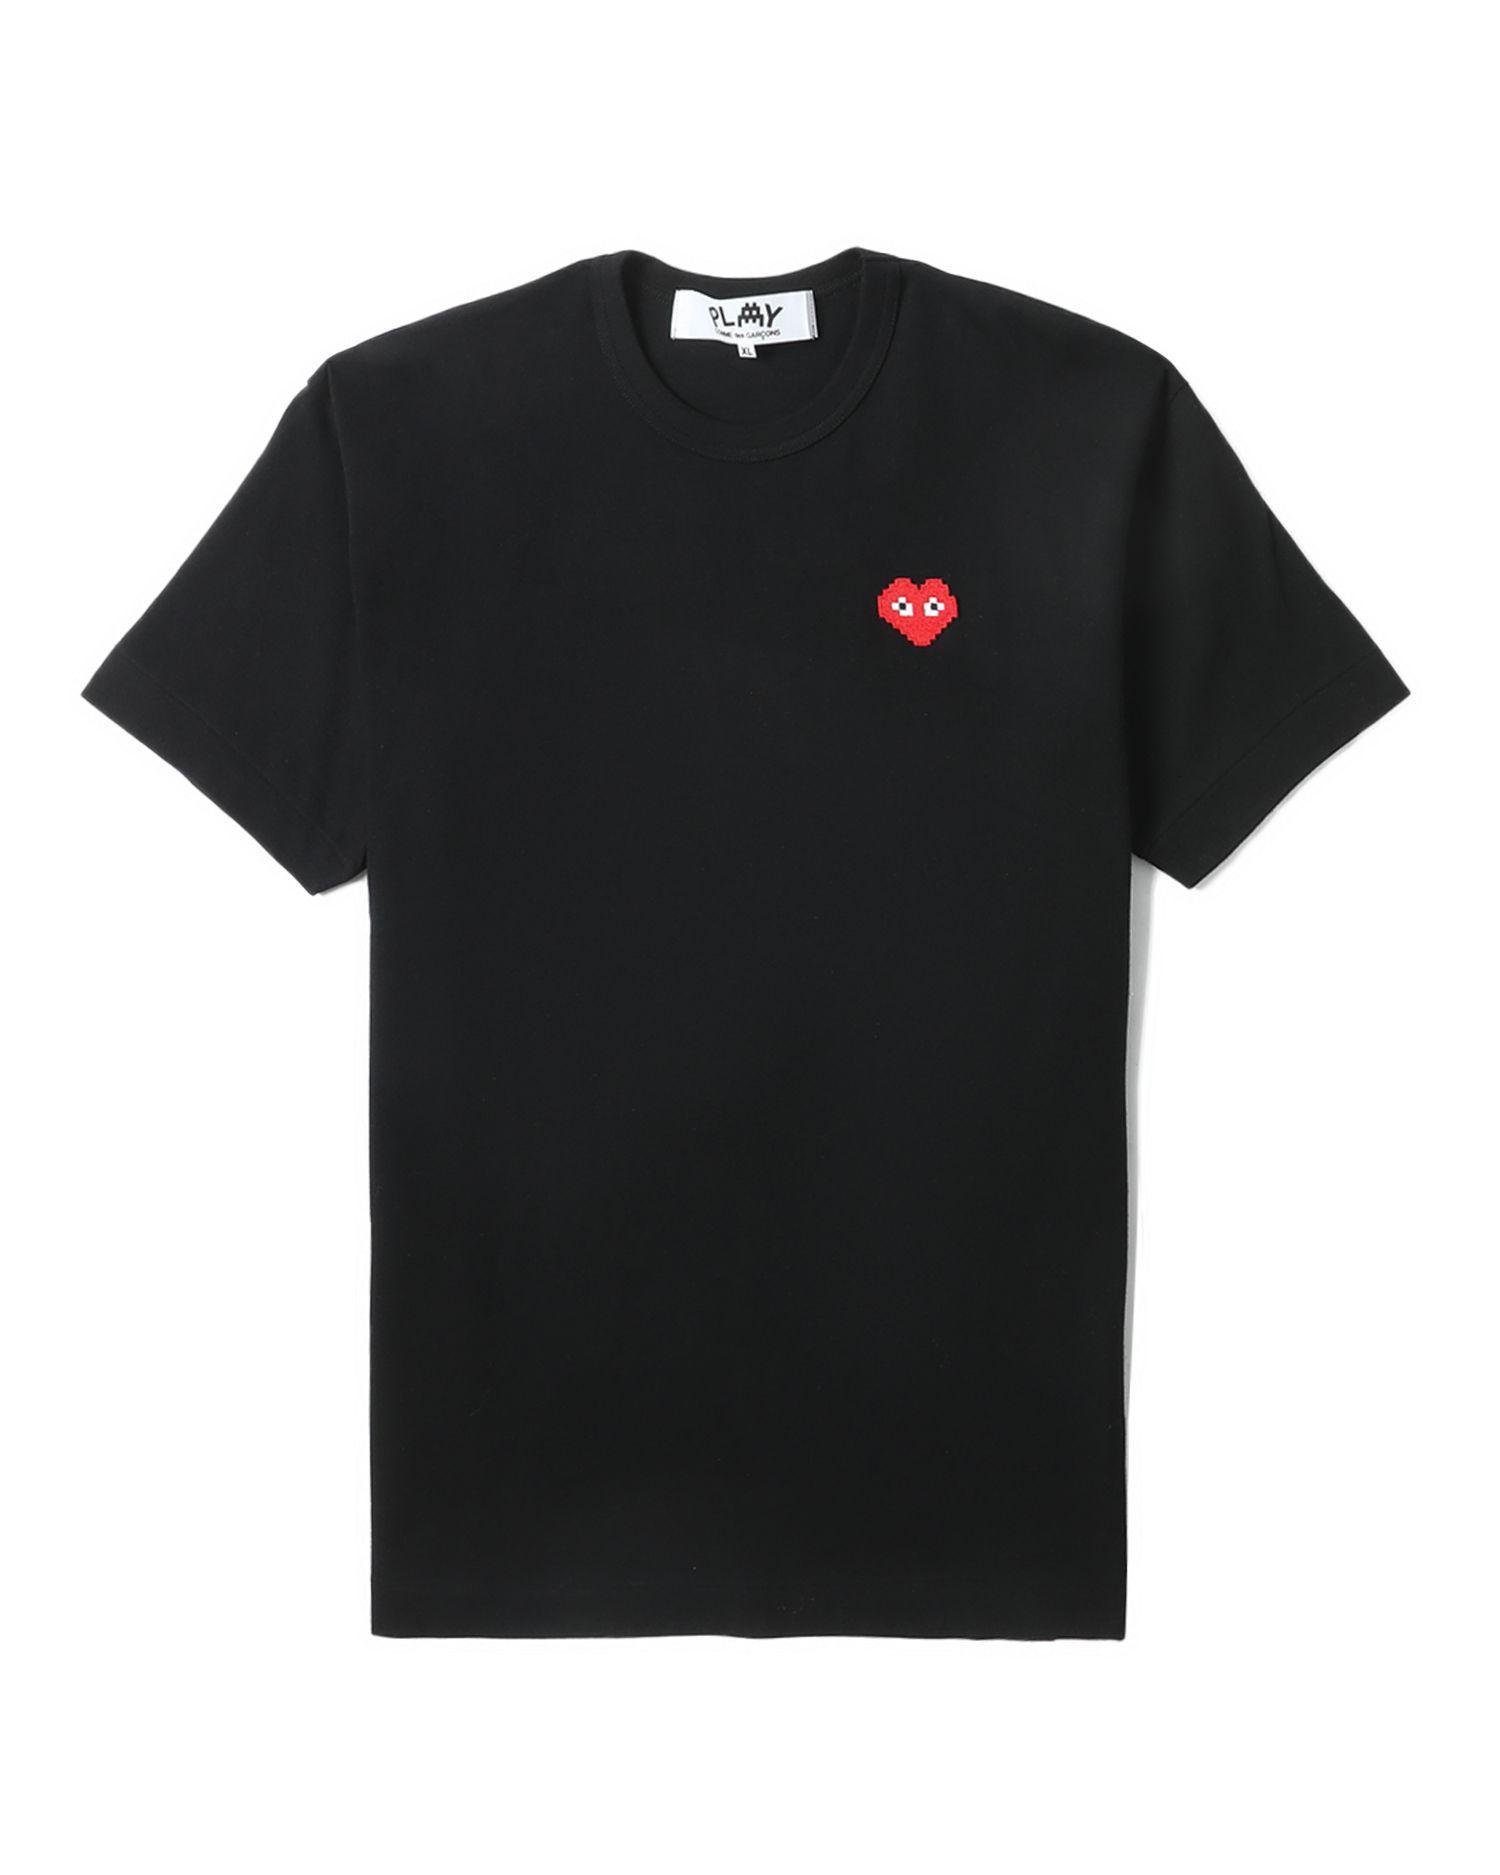 X INVADER logo tee by COMME DES GARCONS